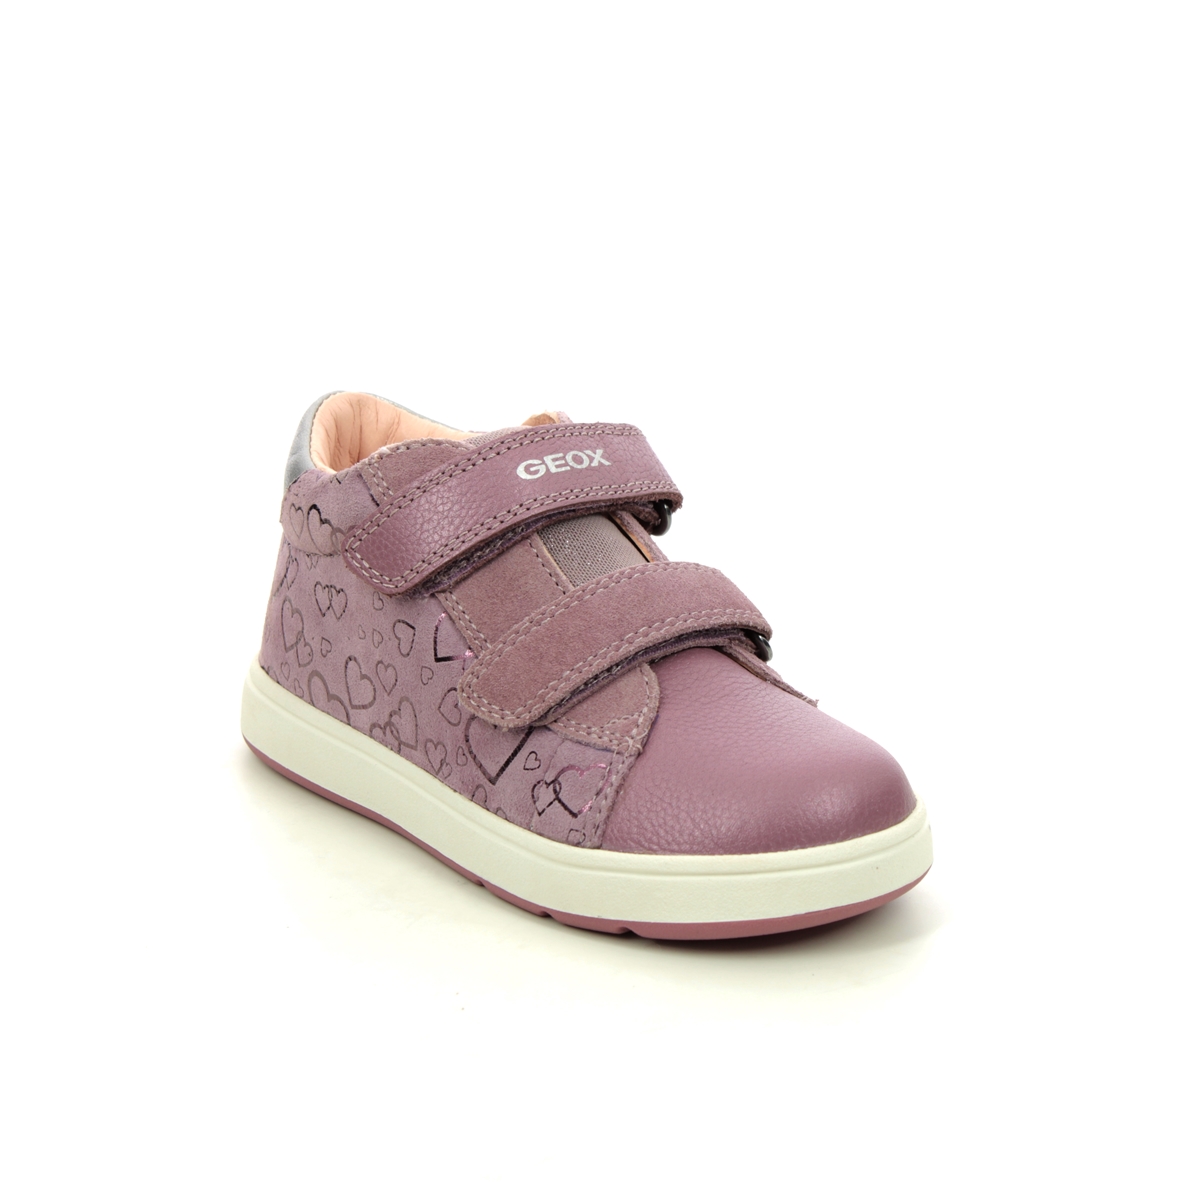 Geox - Biglia G 2V (Pink Leather) B044Cc-C8268 In Size 23 In Plain Pink Leather For kids